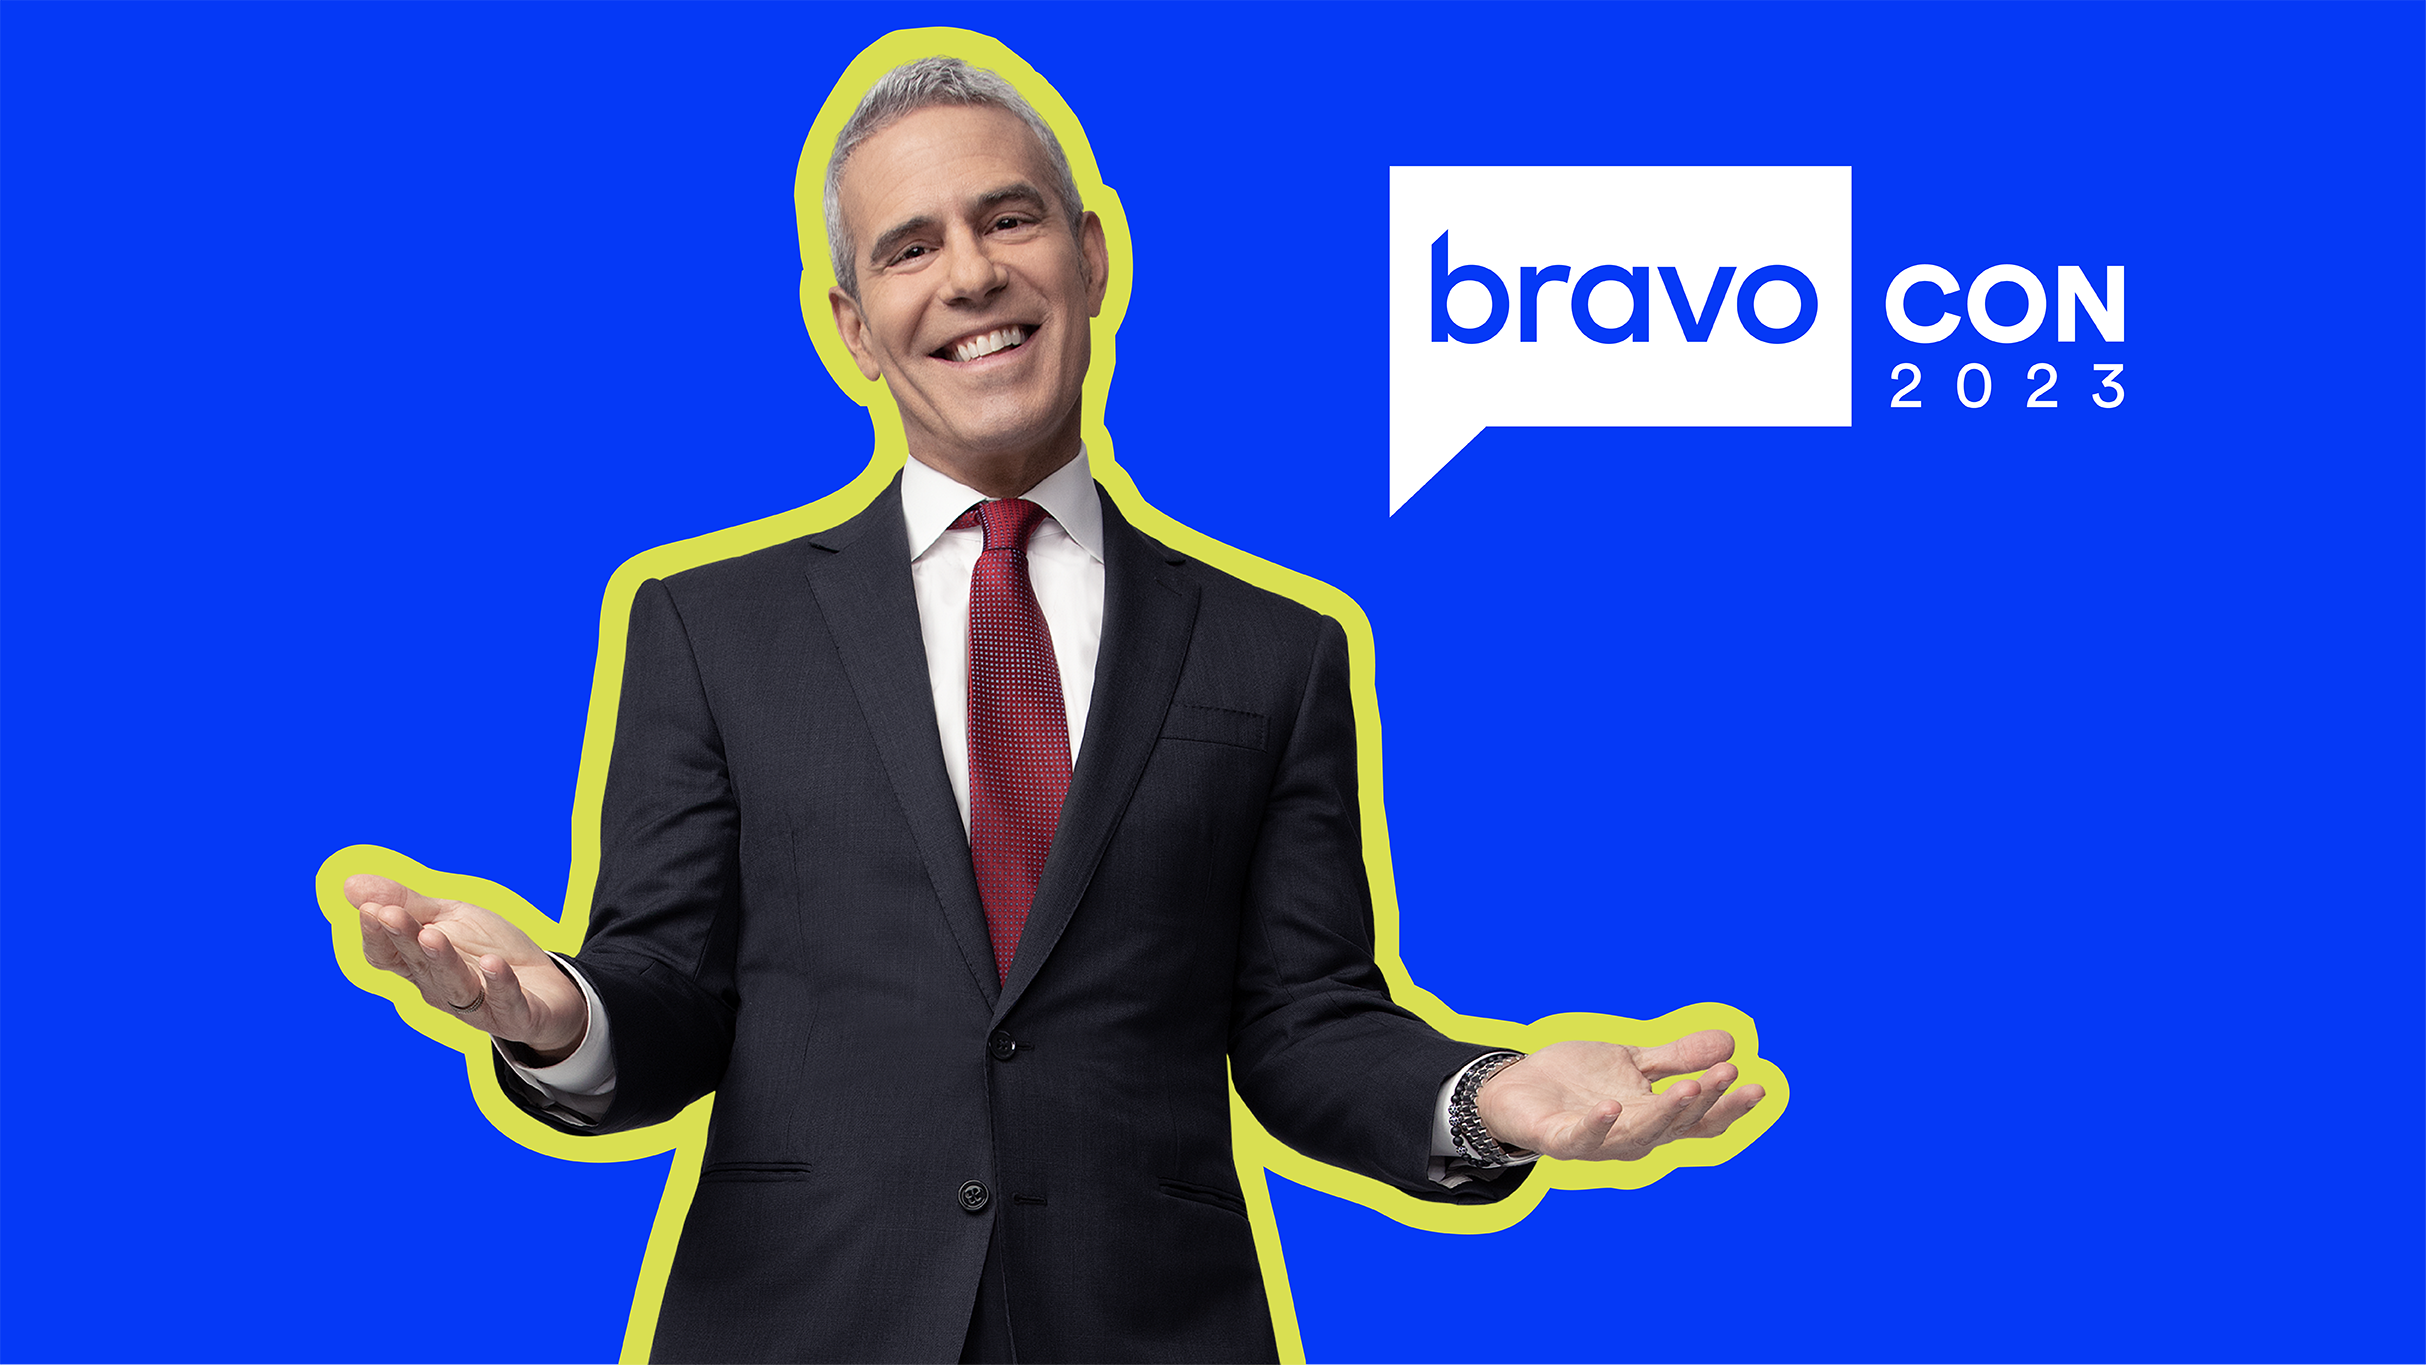 BravoCon LIVE with Andy Cohen! free presale passcode for early tickets in Las Vegas